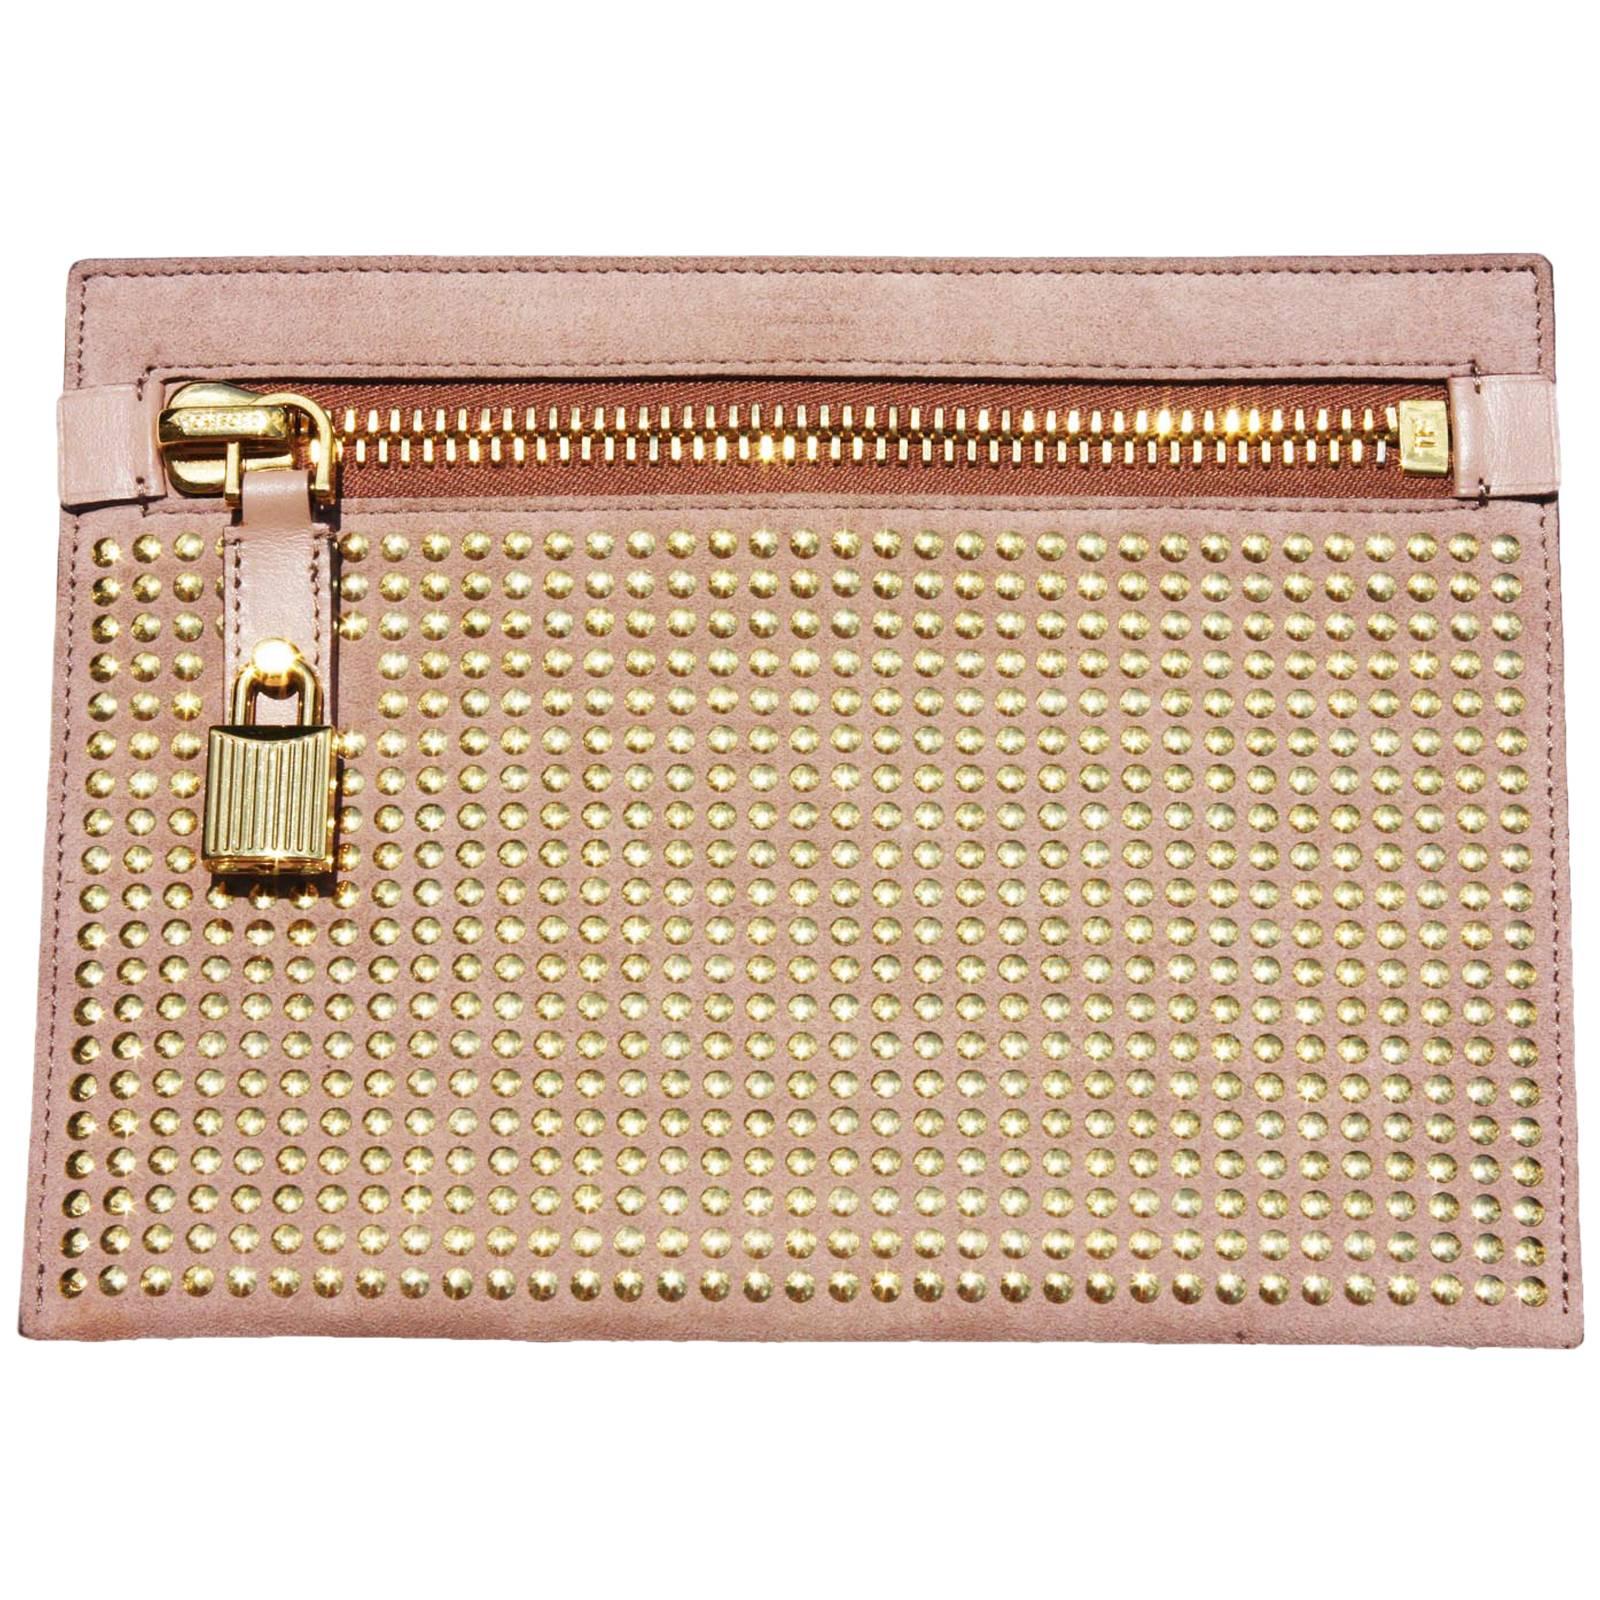 New $1190 Tom Ford Alix Suede Nude/Gold Studded Pouch Clutch Bag with Lock